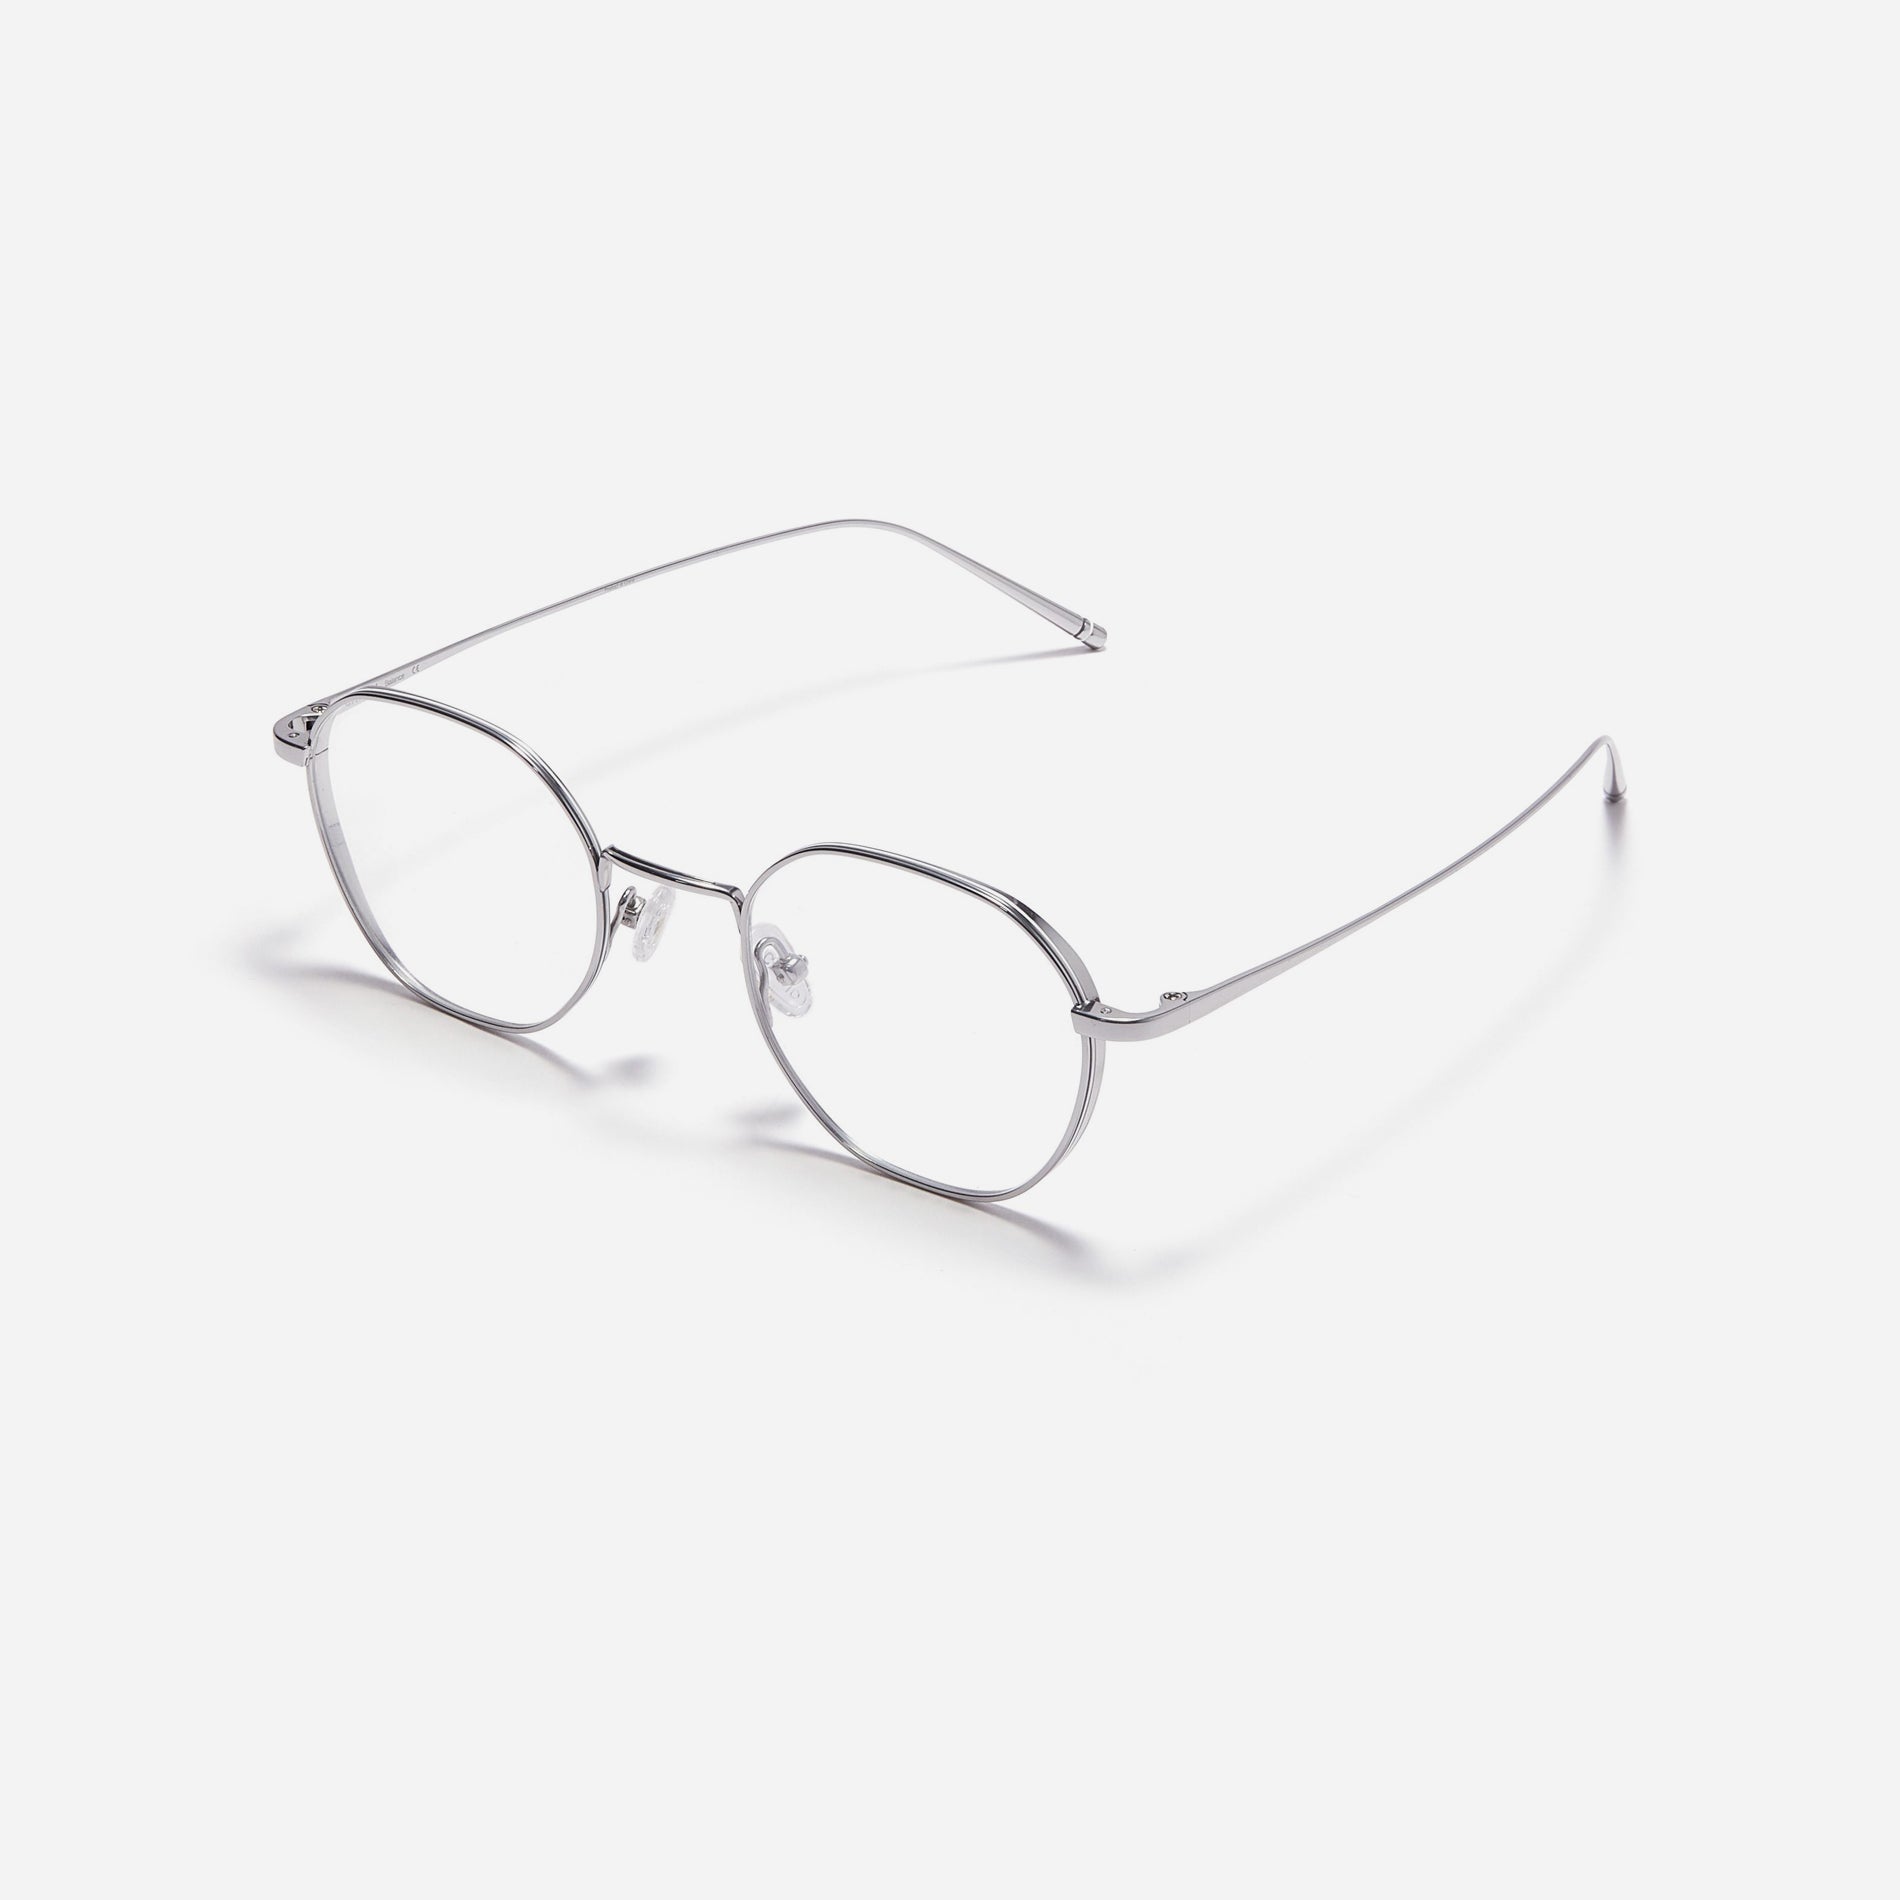 Hexagonal-shaped, full-metal eyeglasses with a dual-rim structure designed to accommodate thicker, high-prescription lenses. Both the frame and temples are made of pure titanium, ensuring a lightweight and comfortable fit.